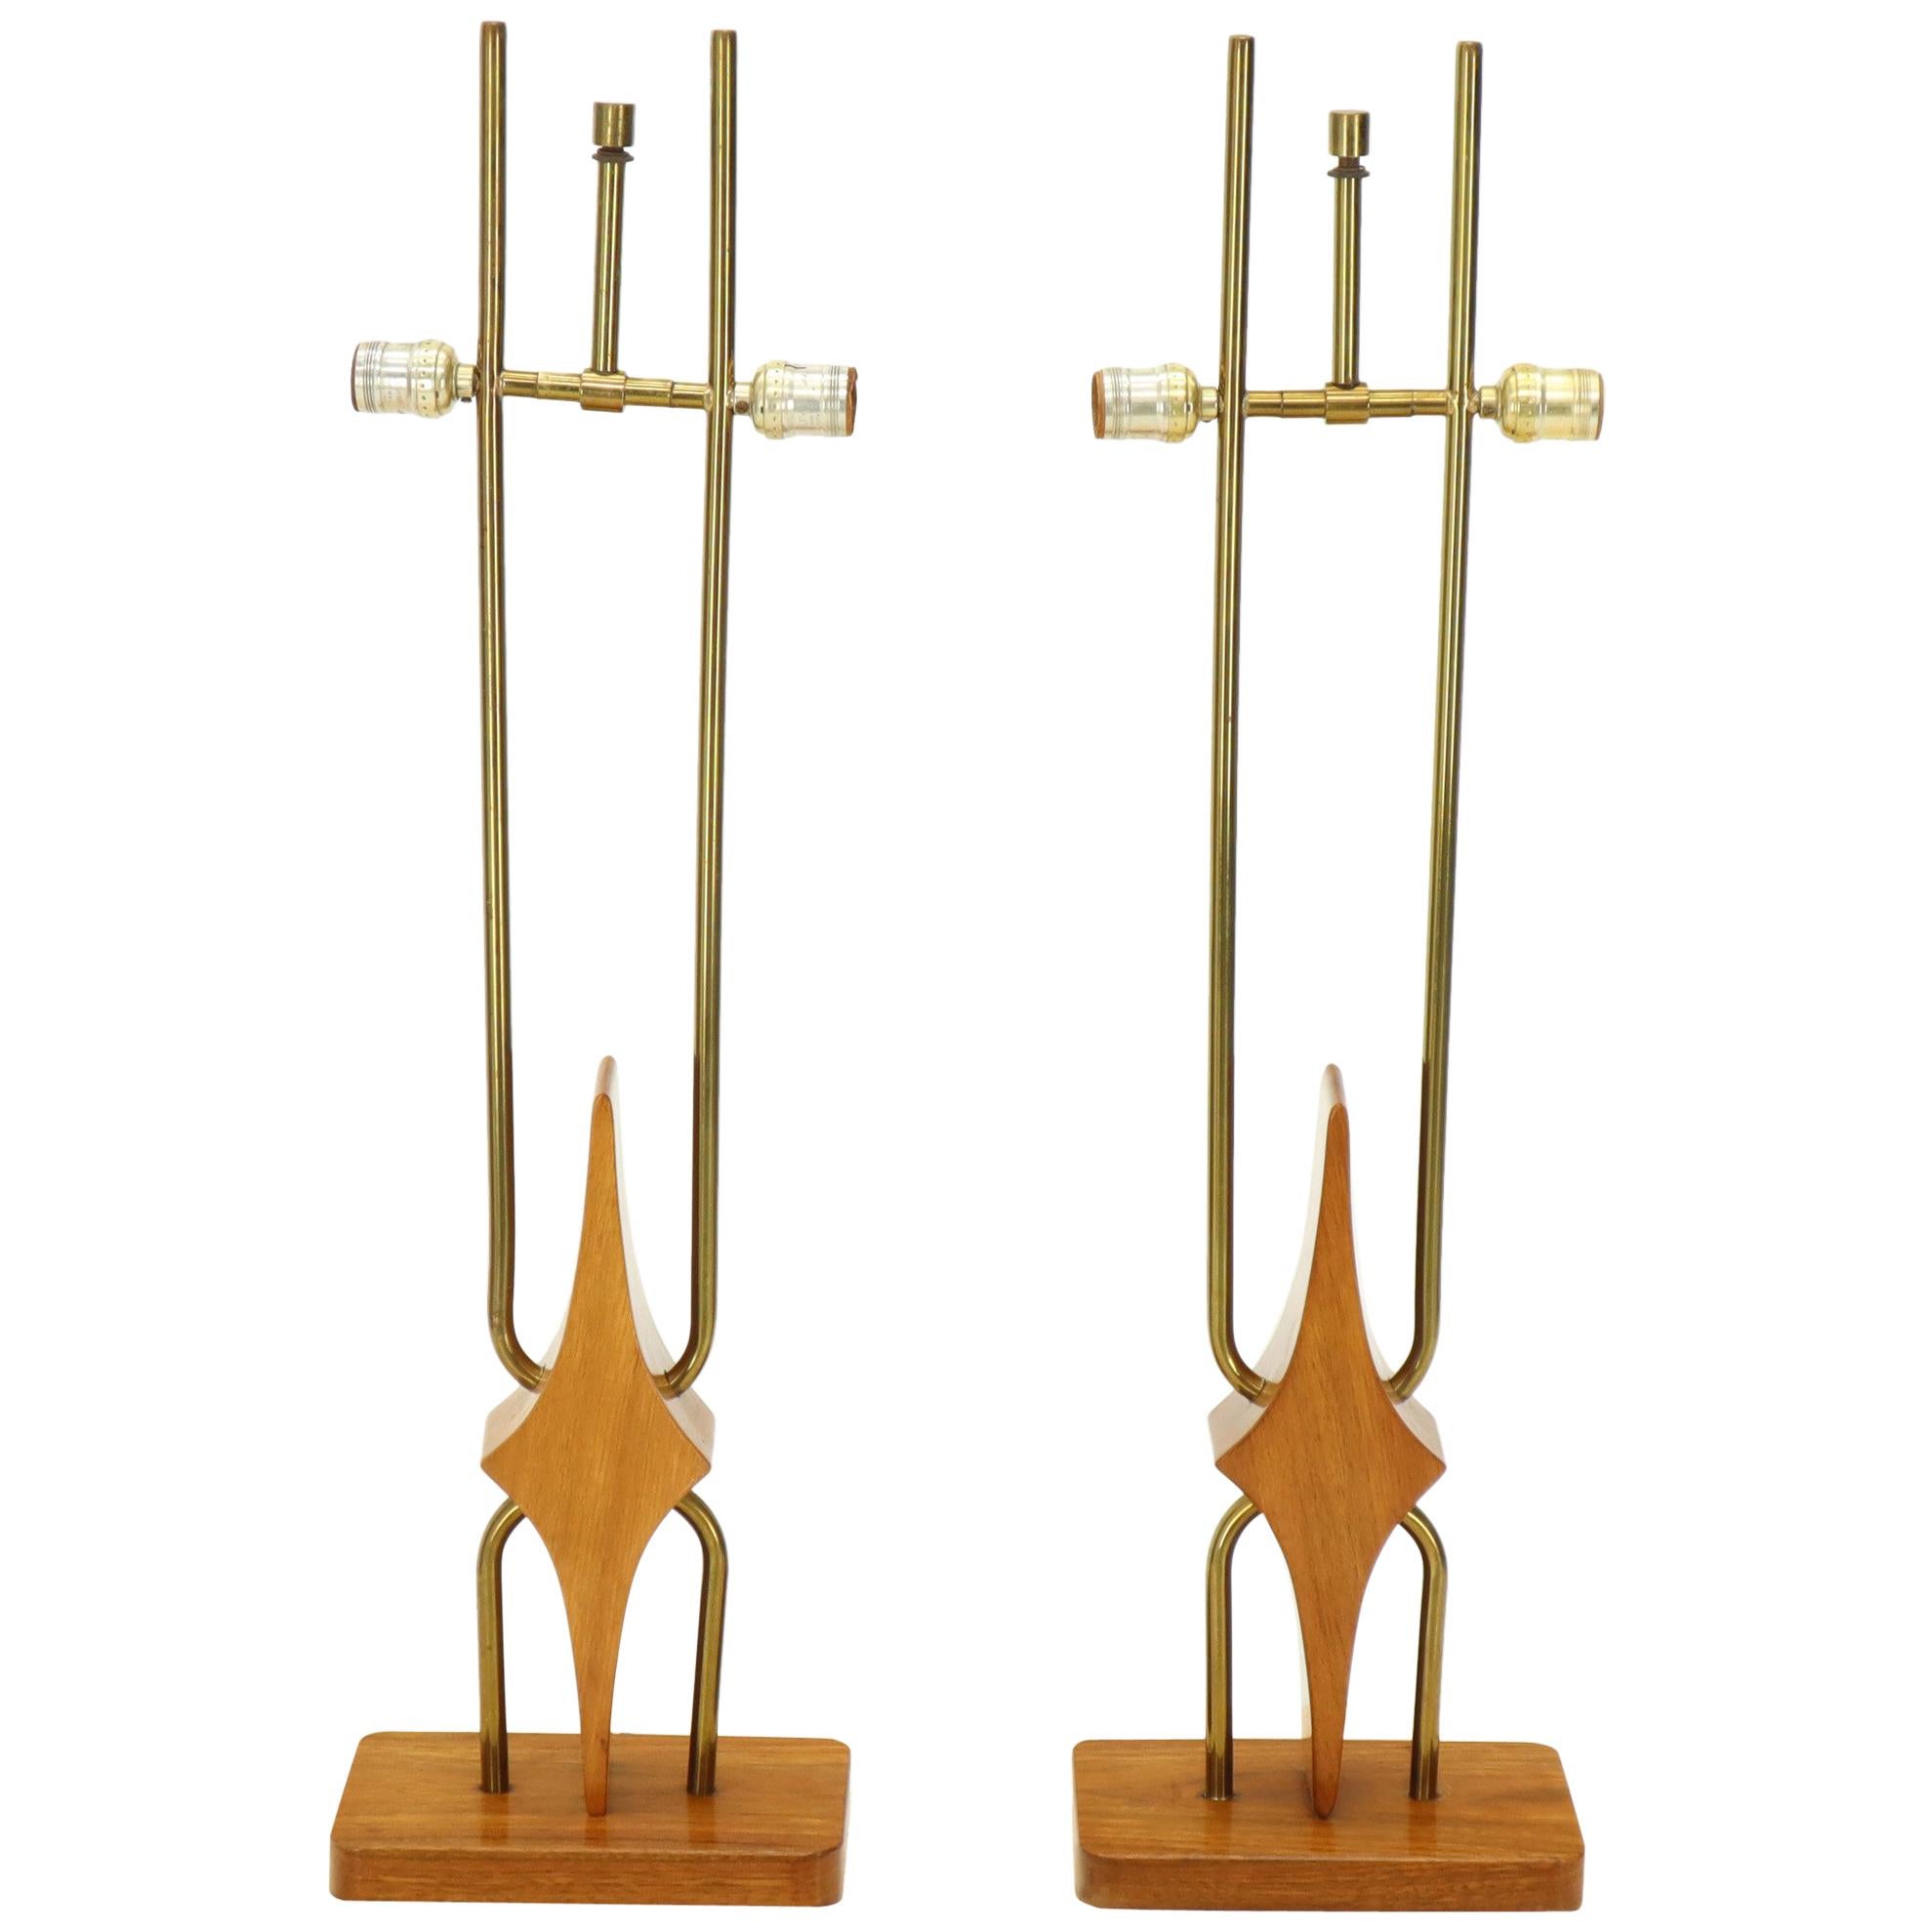 Pair of mid-century modern walnut and brass table lamps. Weaved rounded rectangular shade. Shades measure: 20 x 11 x 9